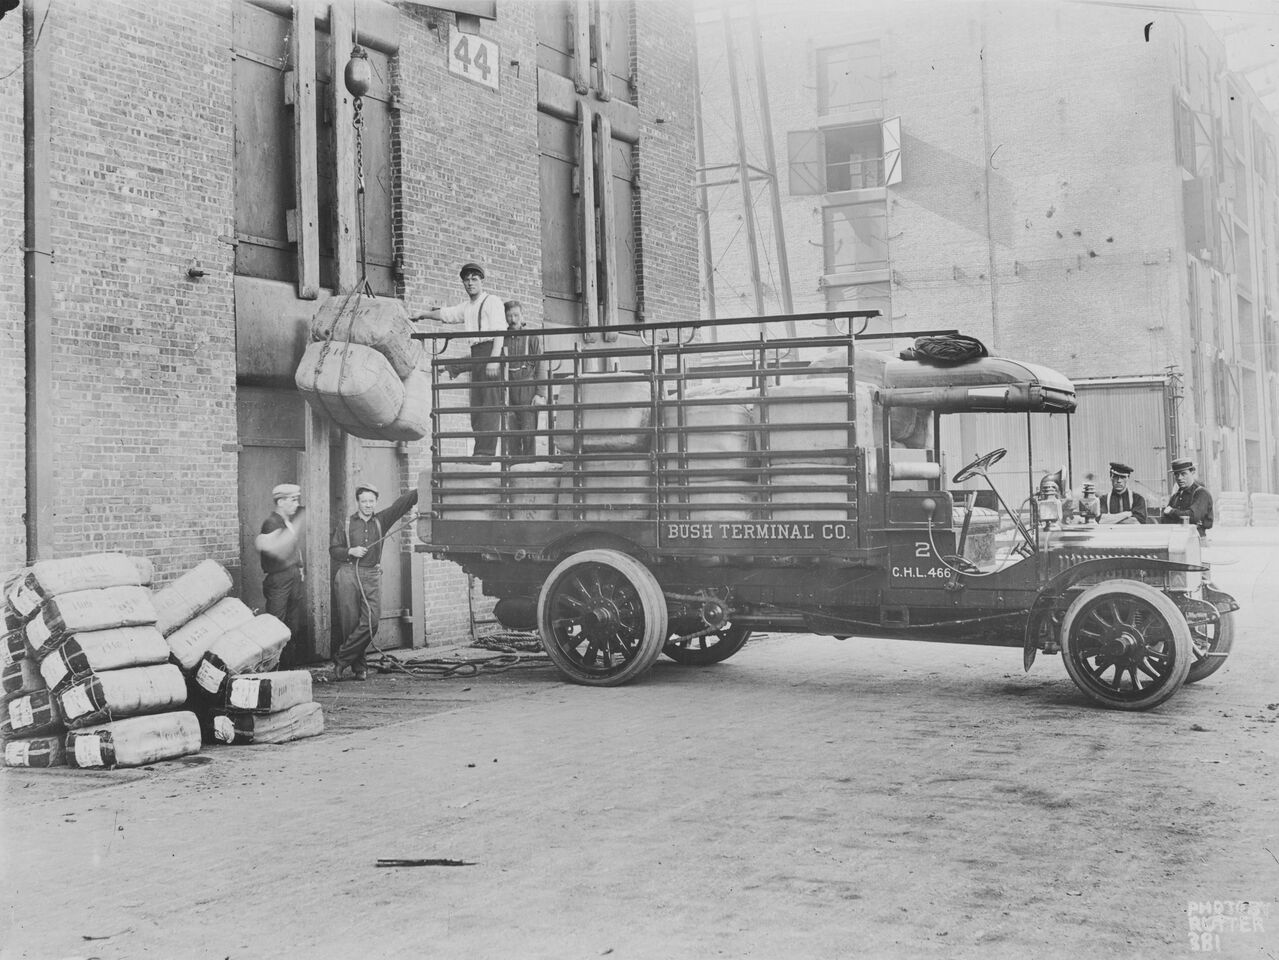 A historic image of people working on a truck.